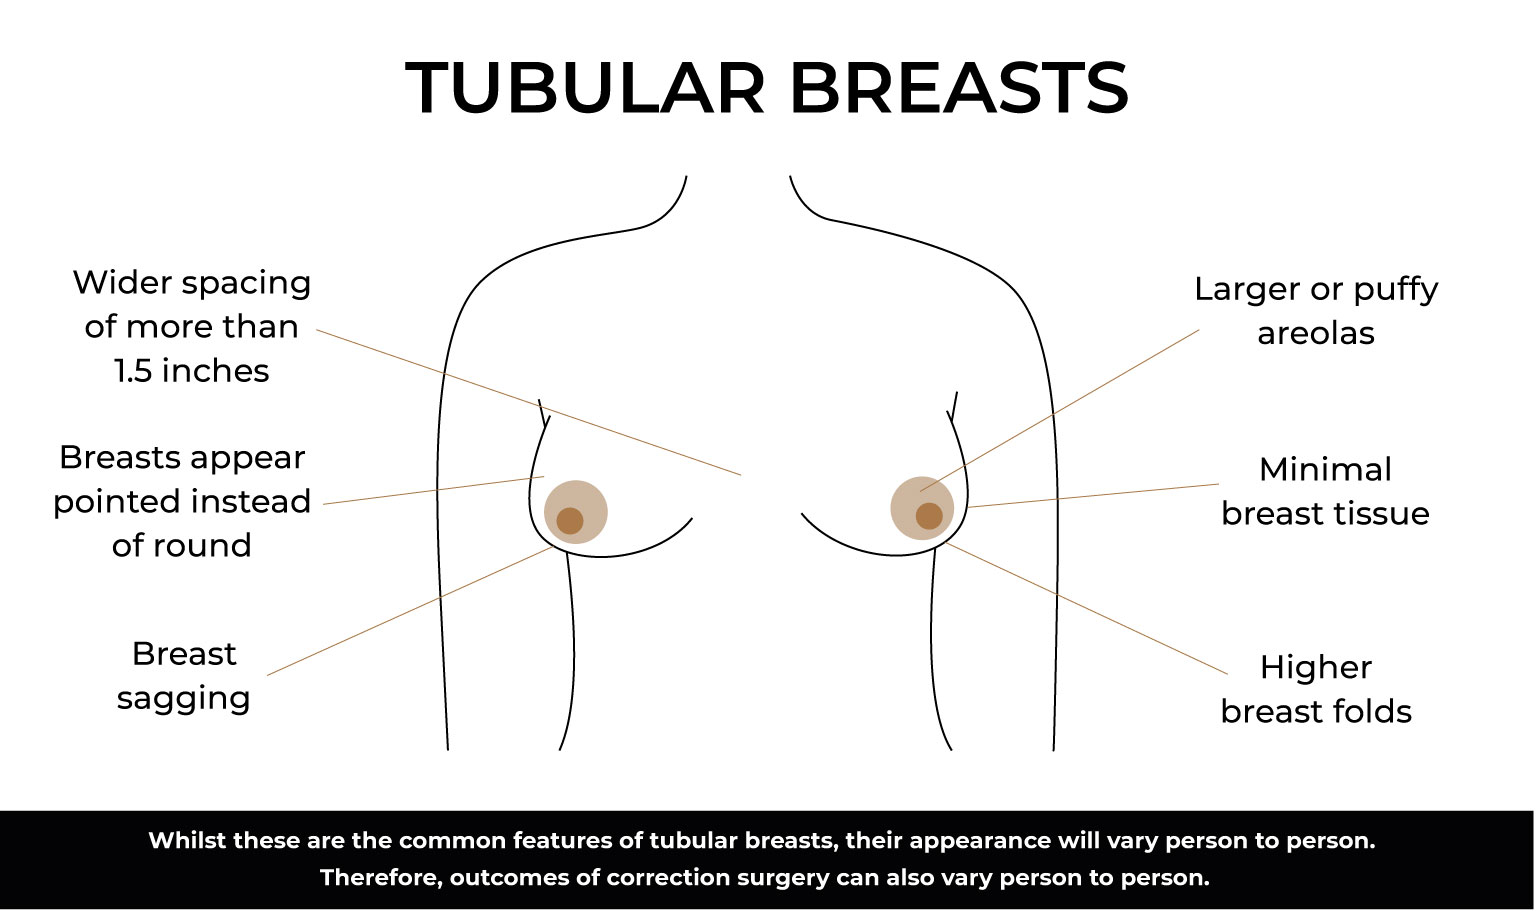 What do tubular breasts look like?